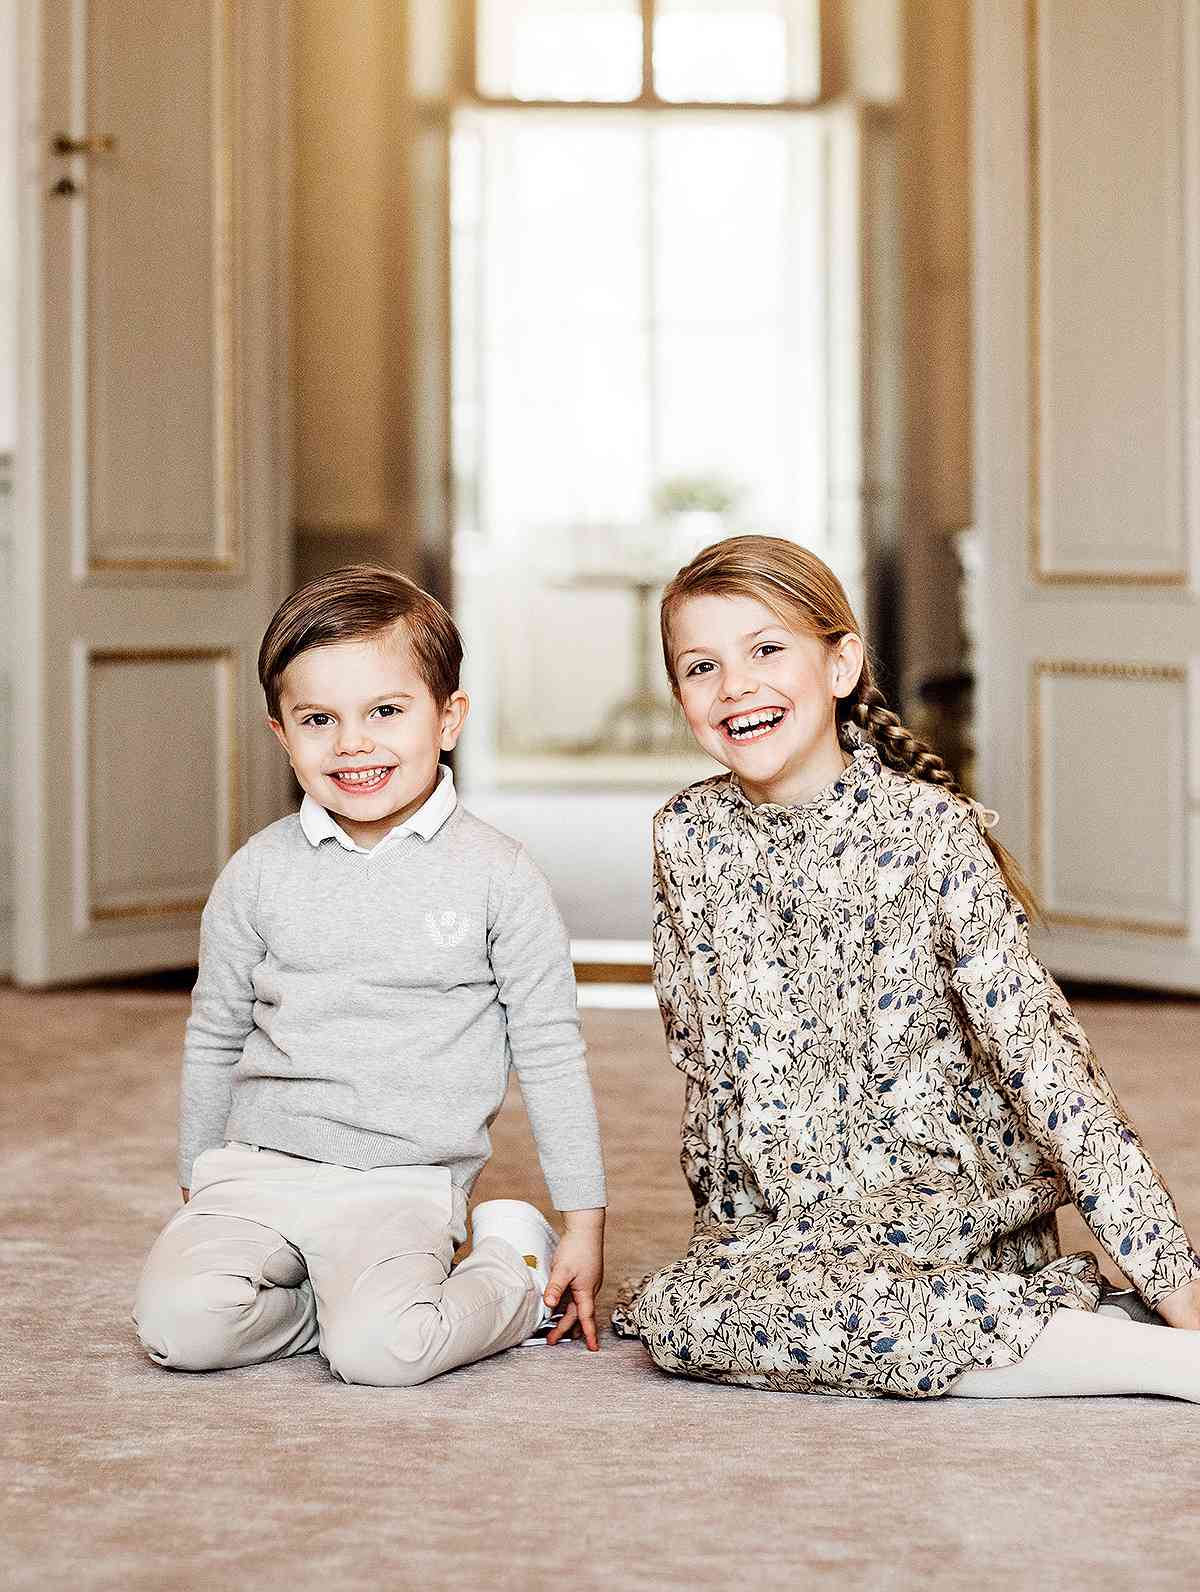 Princess Estelle of Sweden, here with her brother Prince Oscar